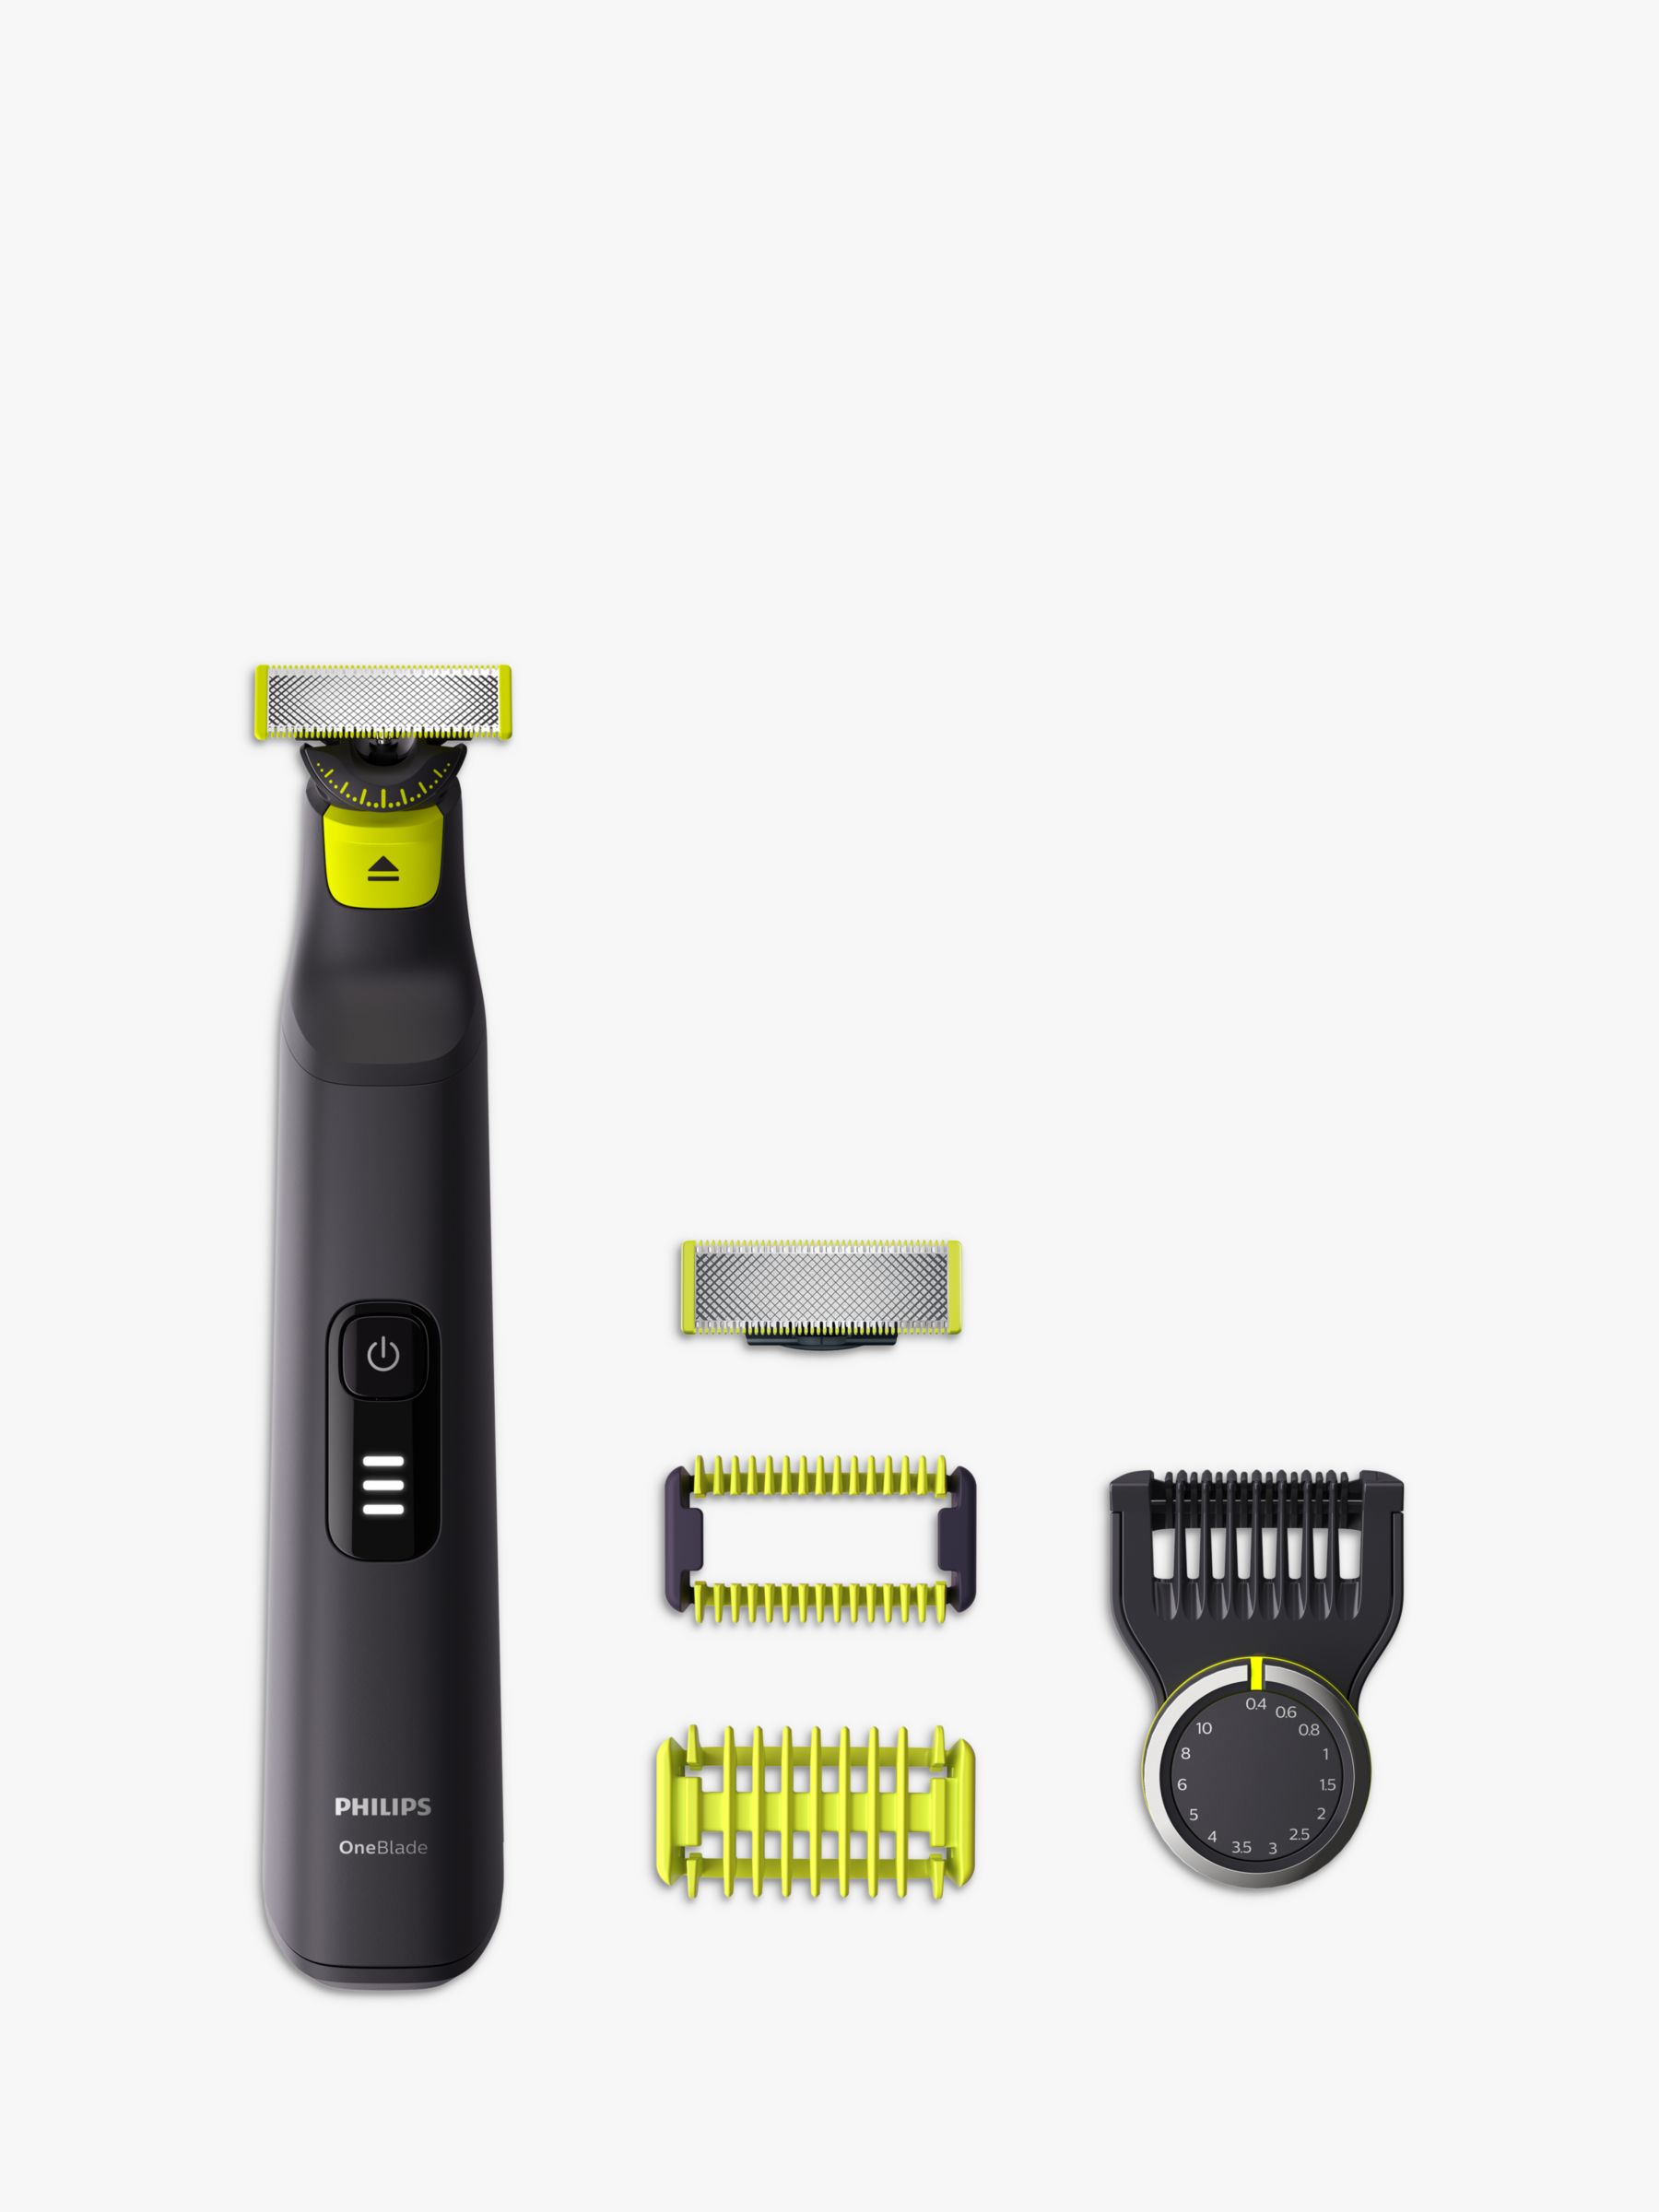  Braun Hair Clippers for Men, MGK7221 10-in-1 Body Grooming Kit,  Beard, Ear and Nose Trimmer, Body Groomer and Hair Clipper, Black/Silver :  Beauty & Personal Care